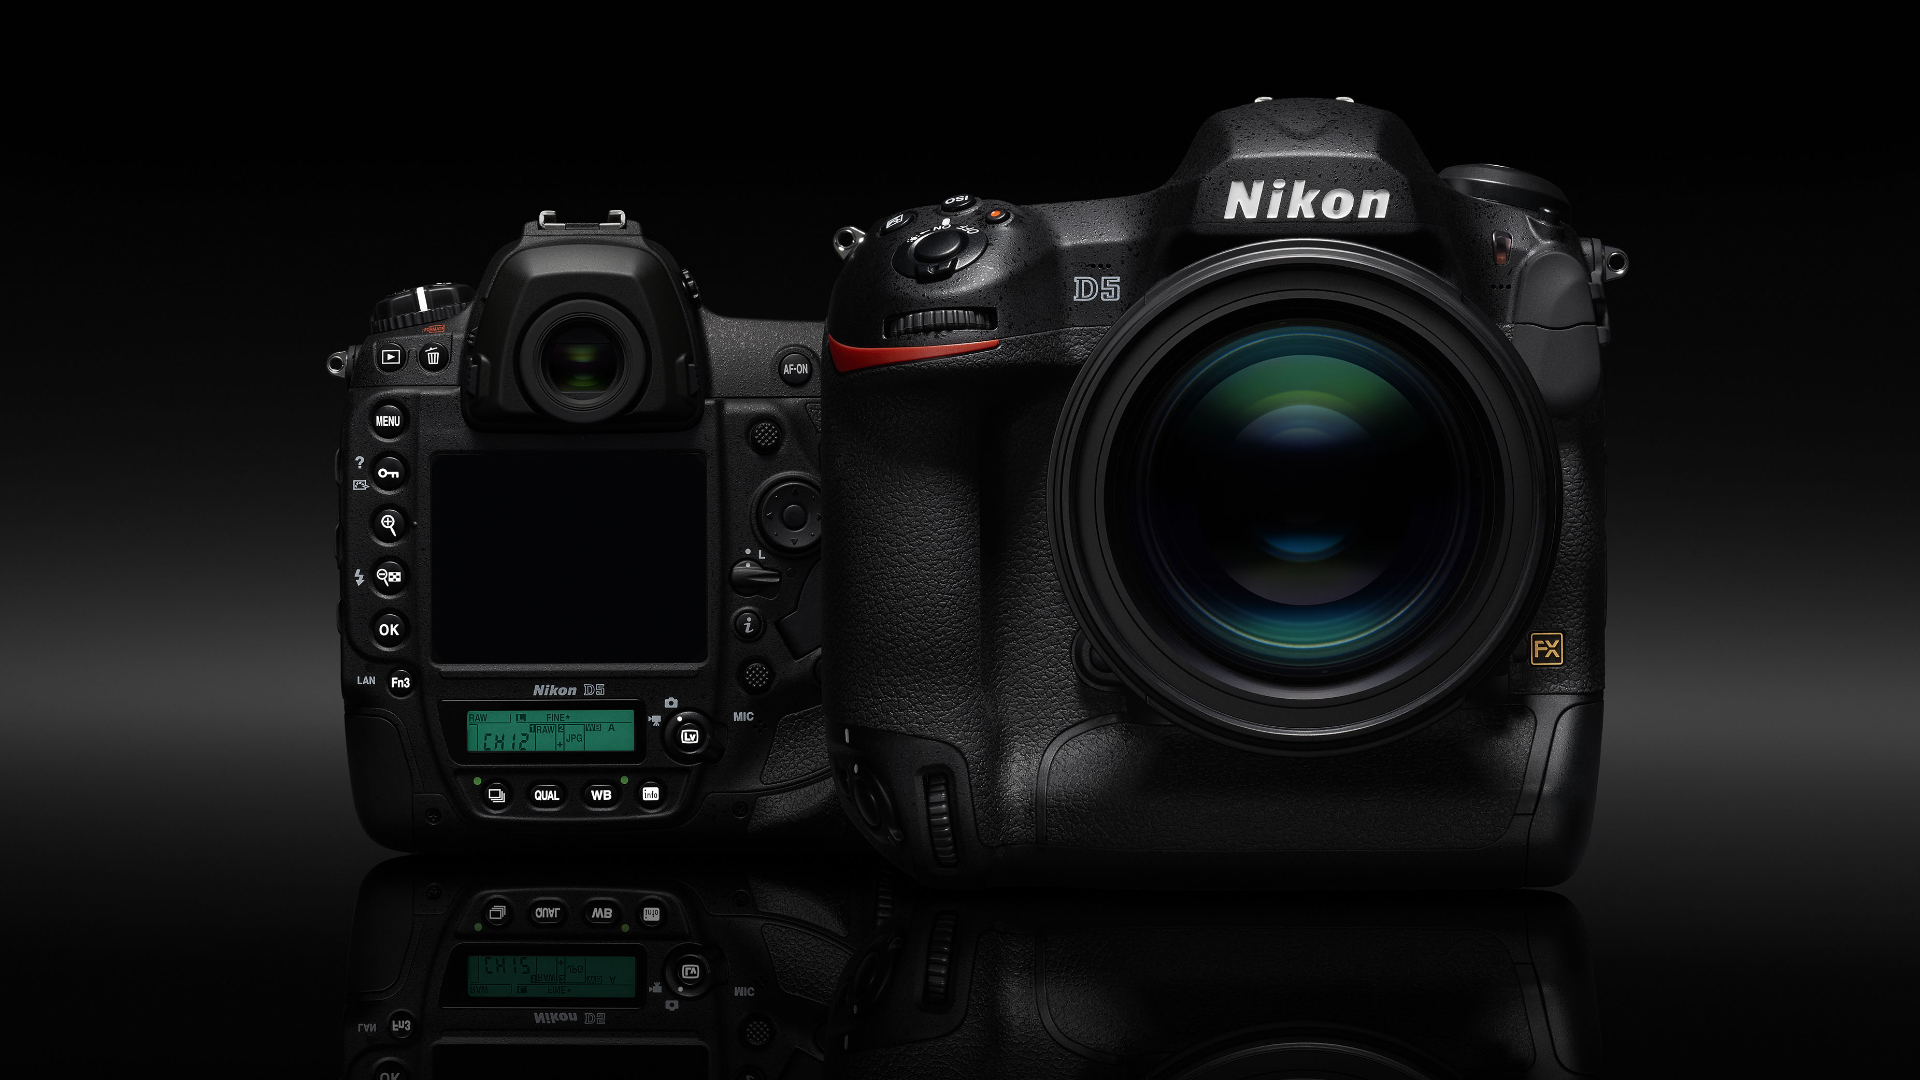 Nikon's D6 flagship sports DSLR could arrive in time for the 2020 Olympics  | TechRadar